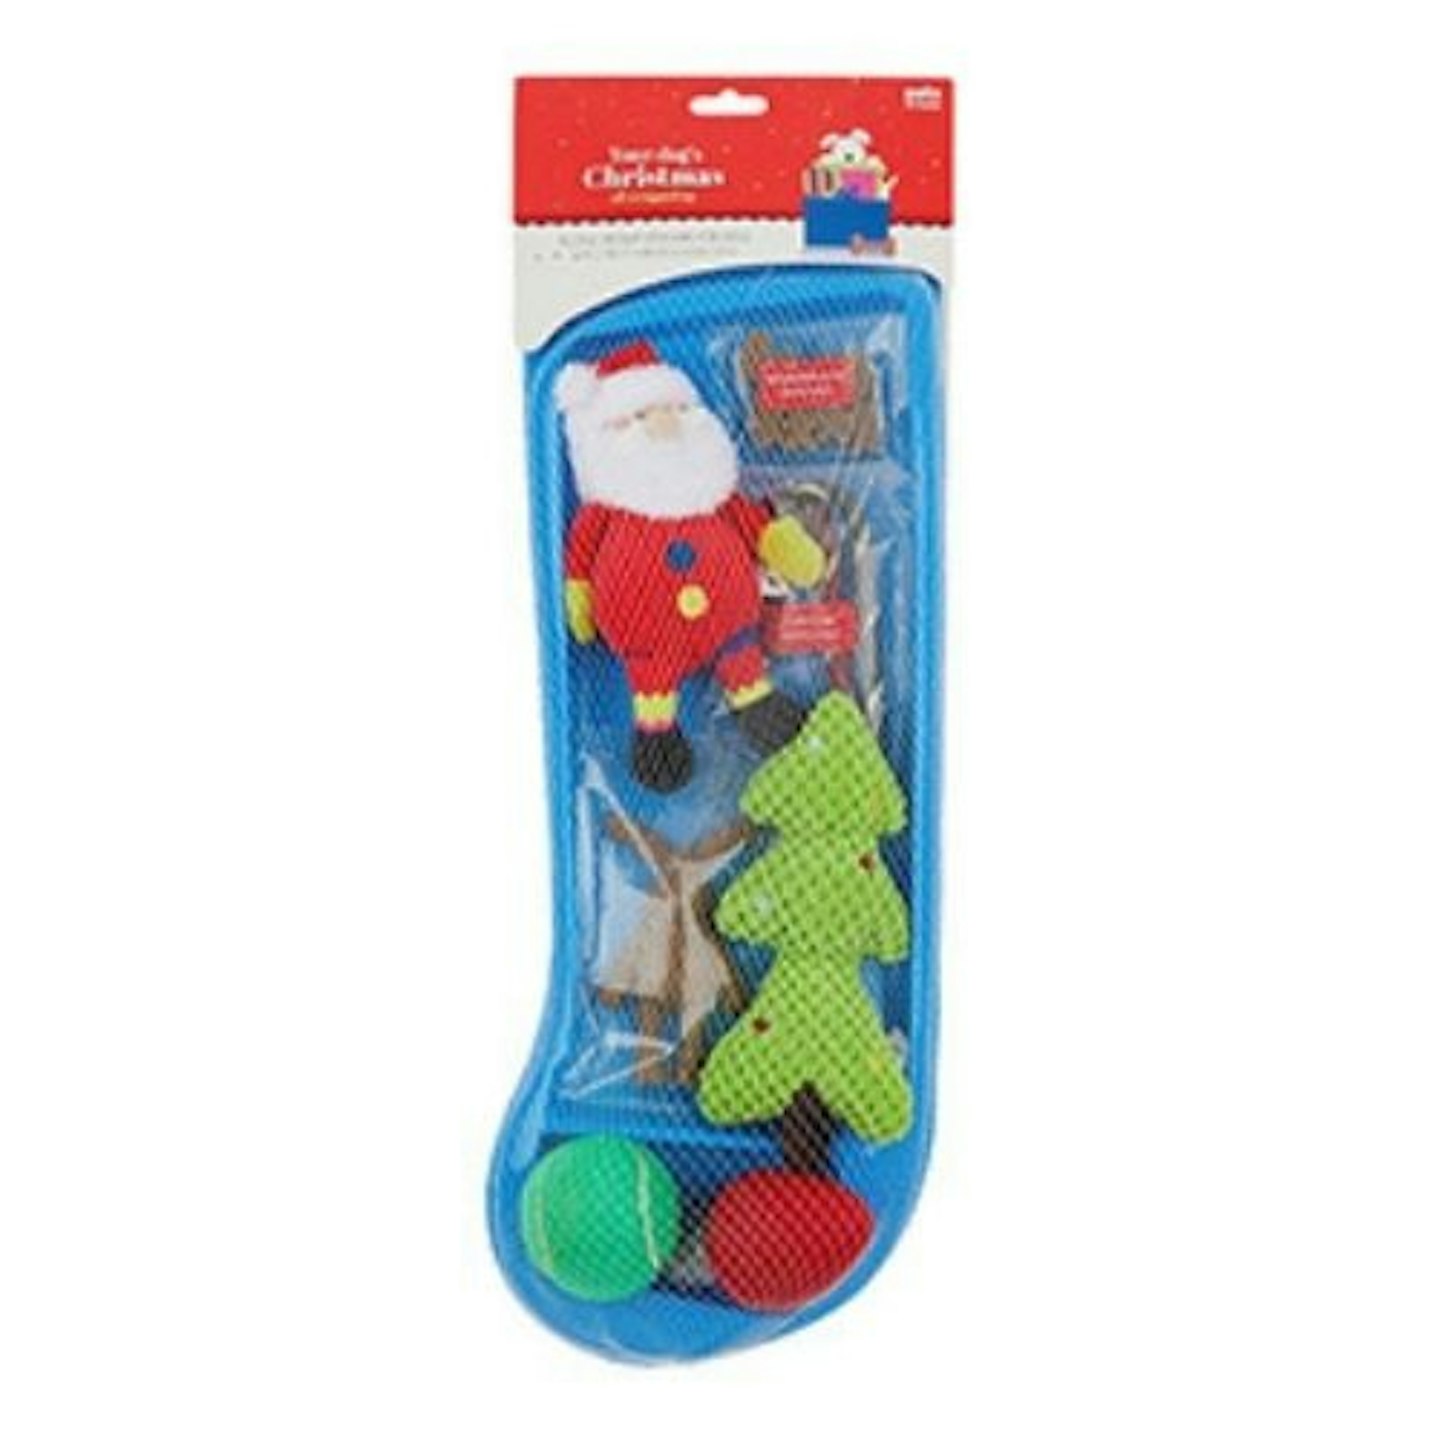 Pets at Home Christmas 6 Piece Toys and Treats Festive Dog Stocking for Small Dogs